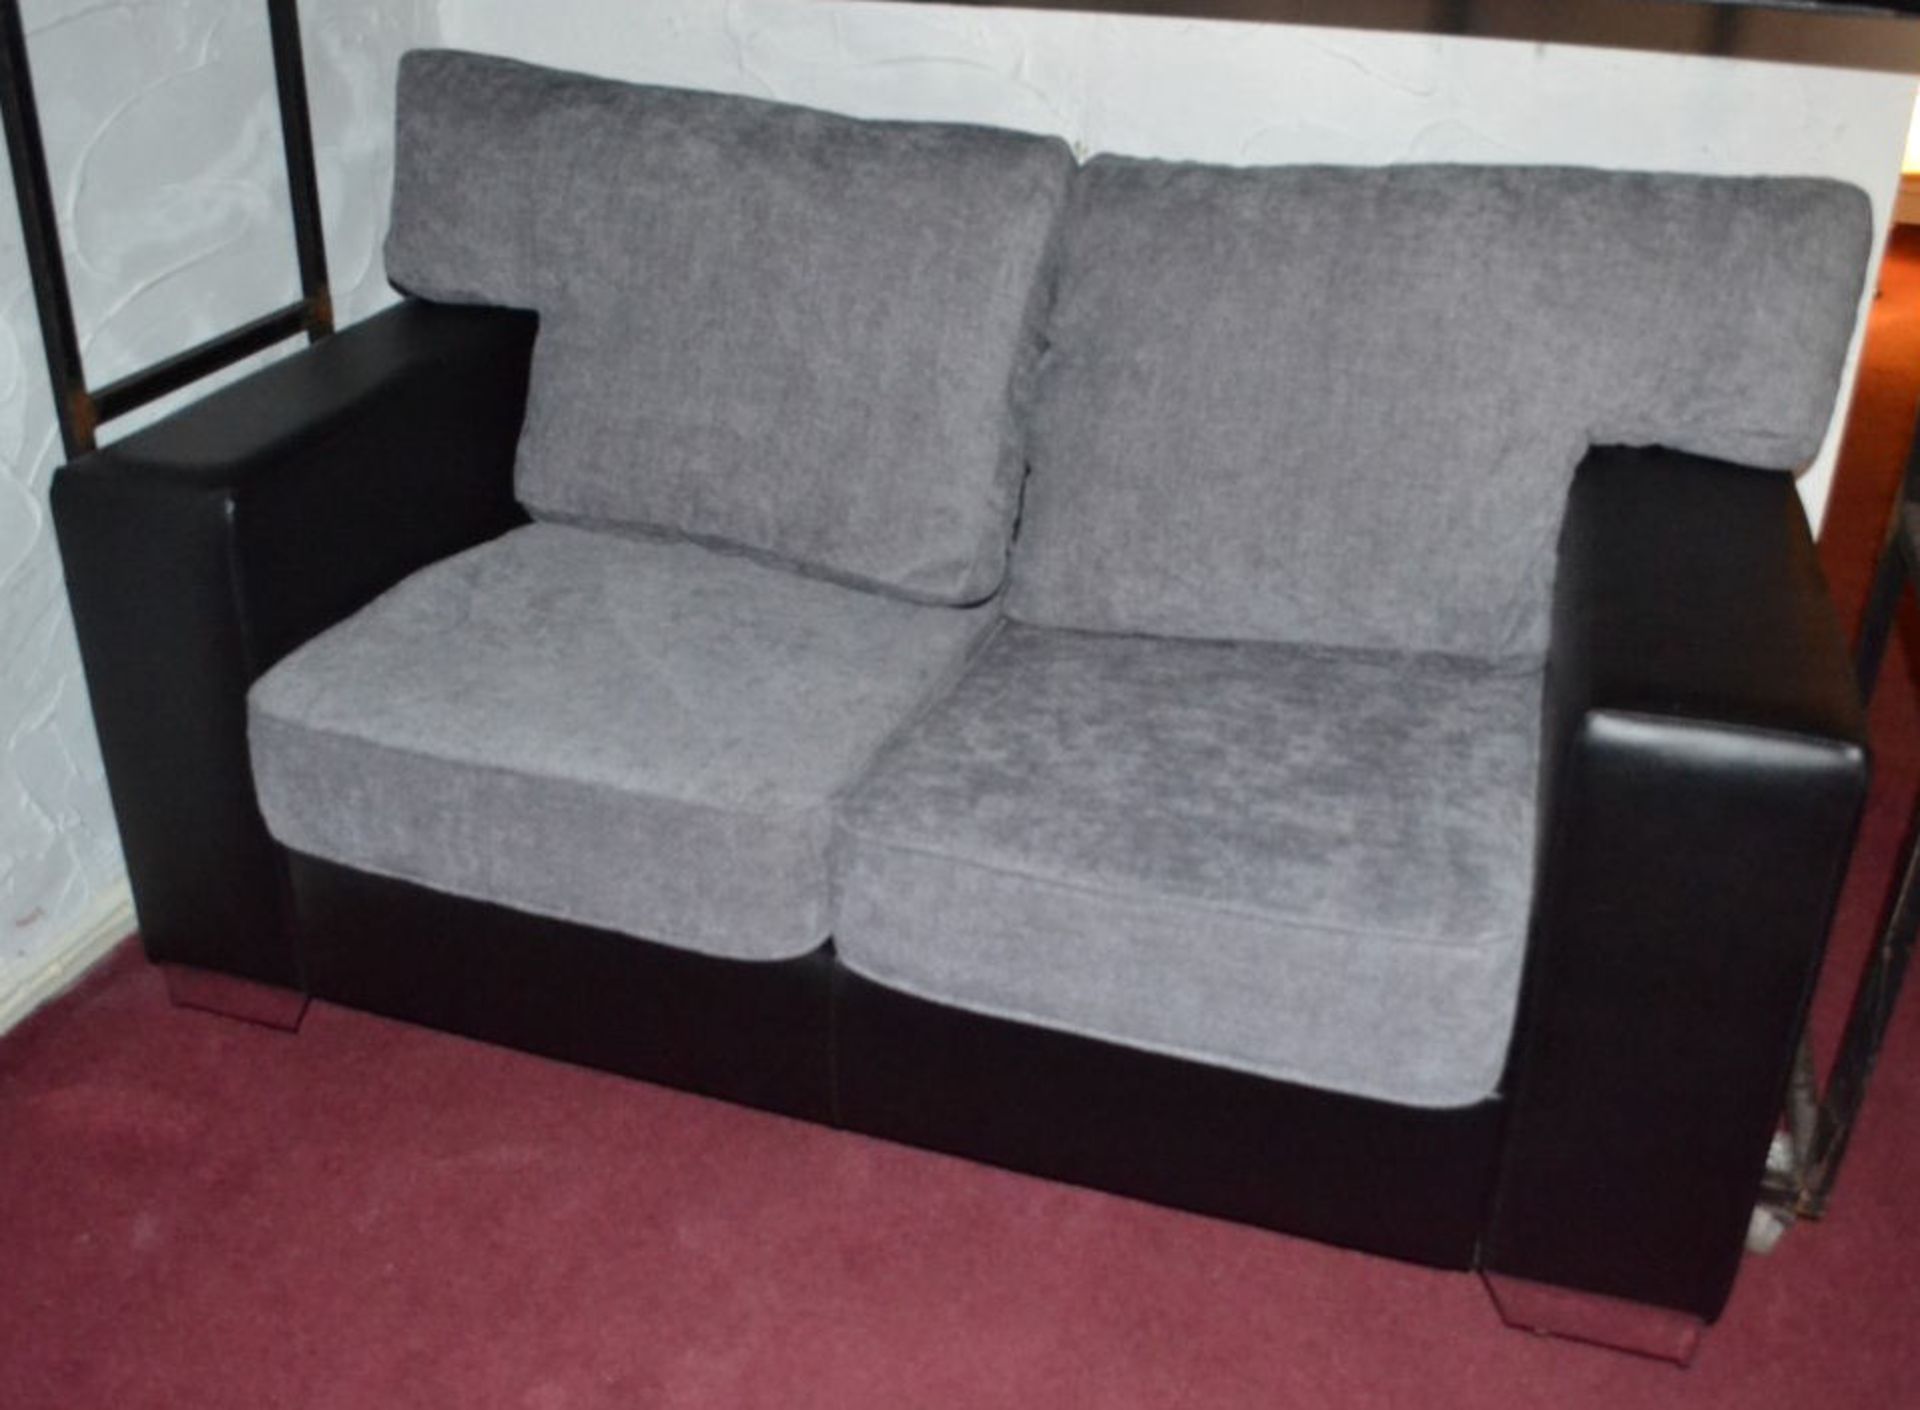 1 x 2-Seater Sofa In Black Faux Leather With Grey Fabric Cushions - Image 3 of 4